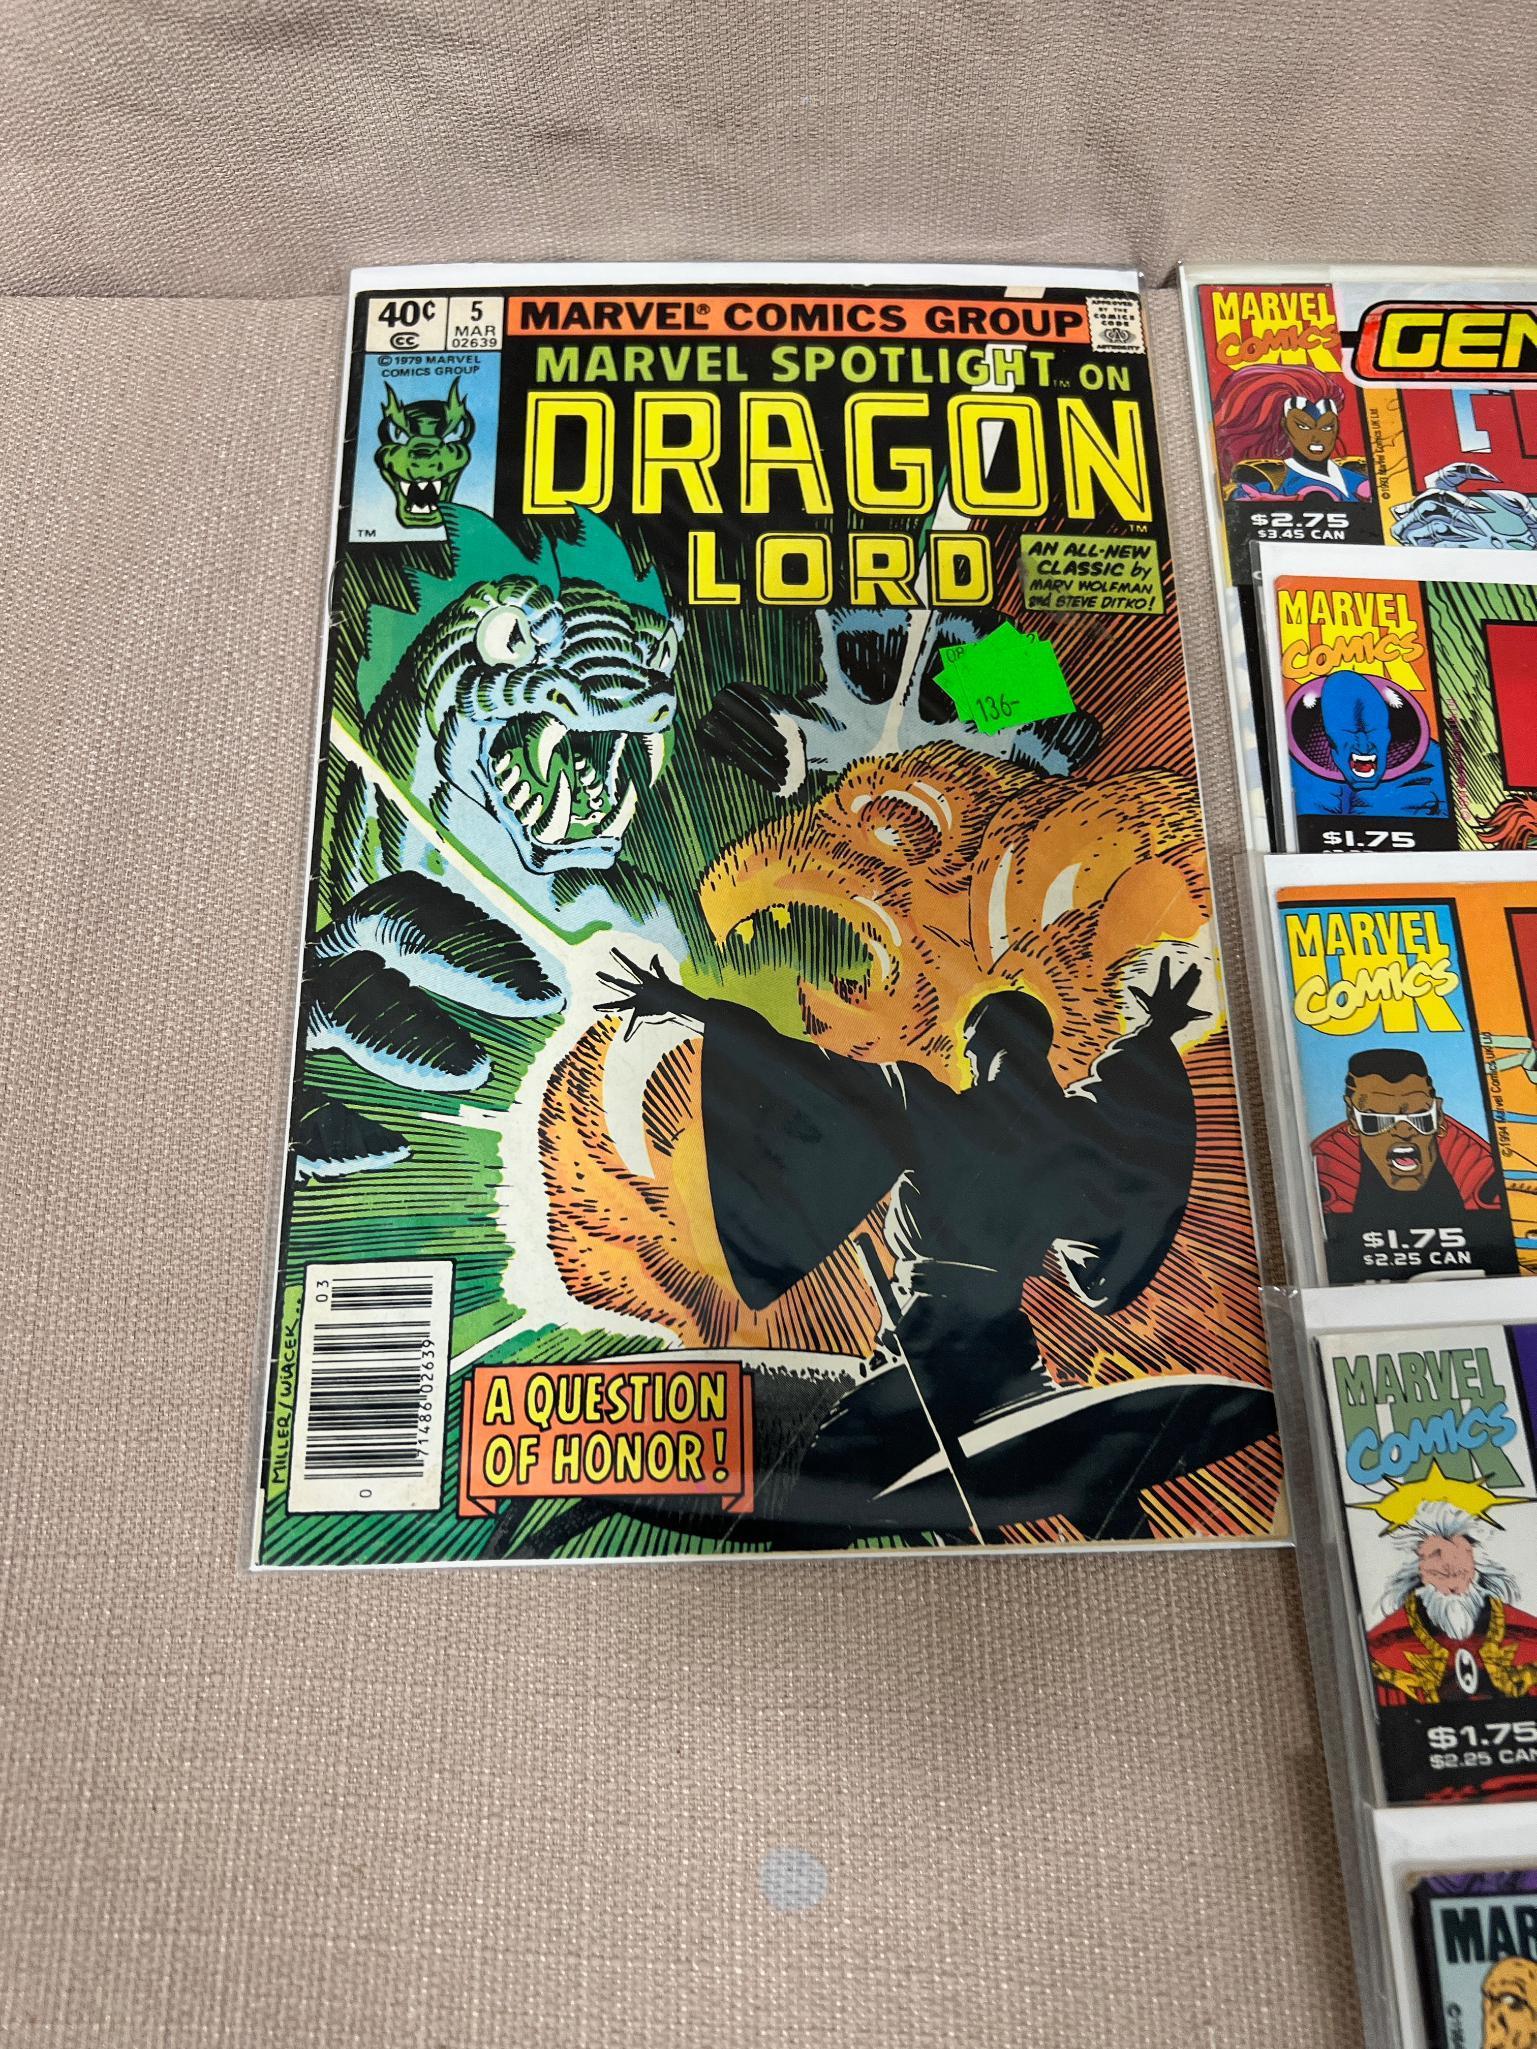 36- Marvel Comics, Doctor Who, Kazar, Voyager and others